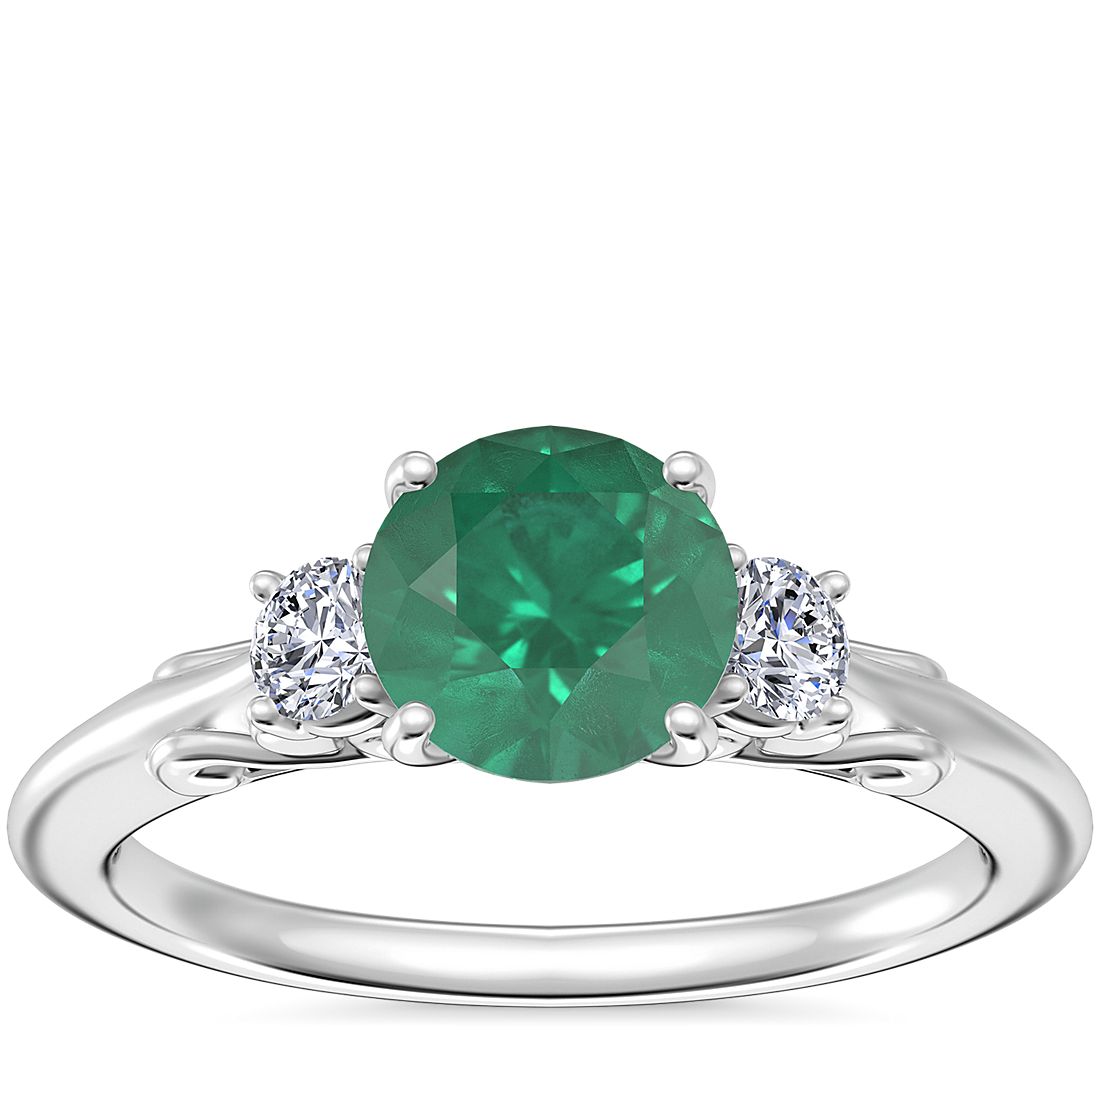 Vintage Three Stone Engagement Ring with Round Emerald in Platinum (6.5mm)